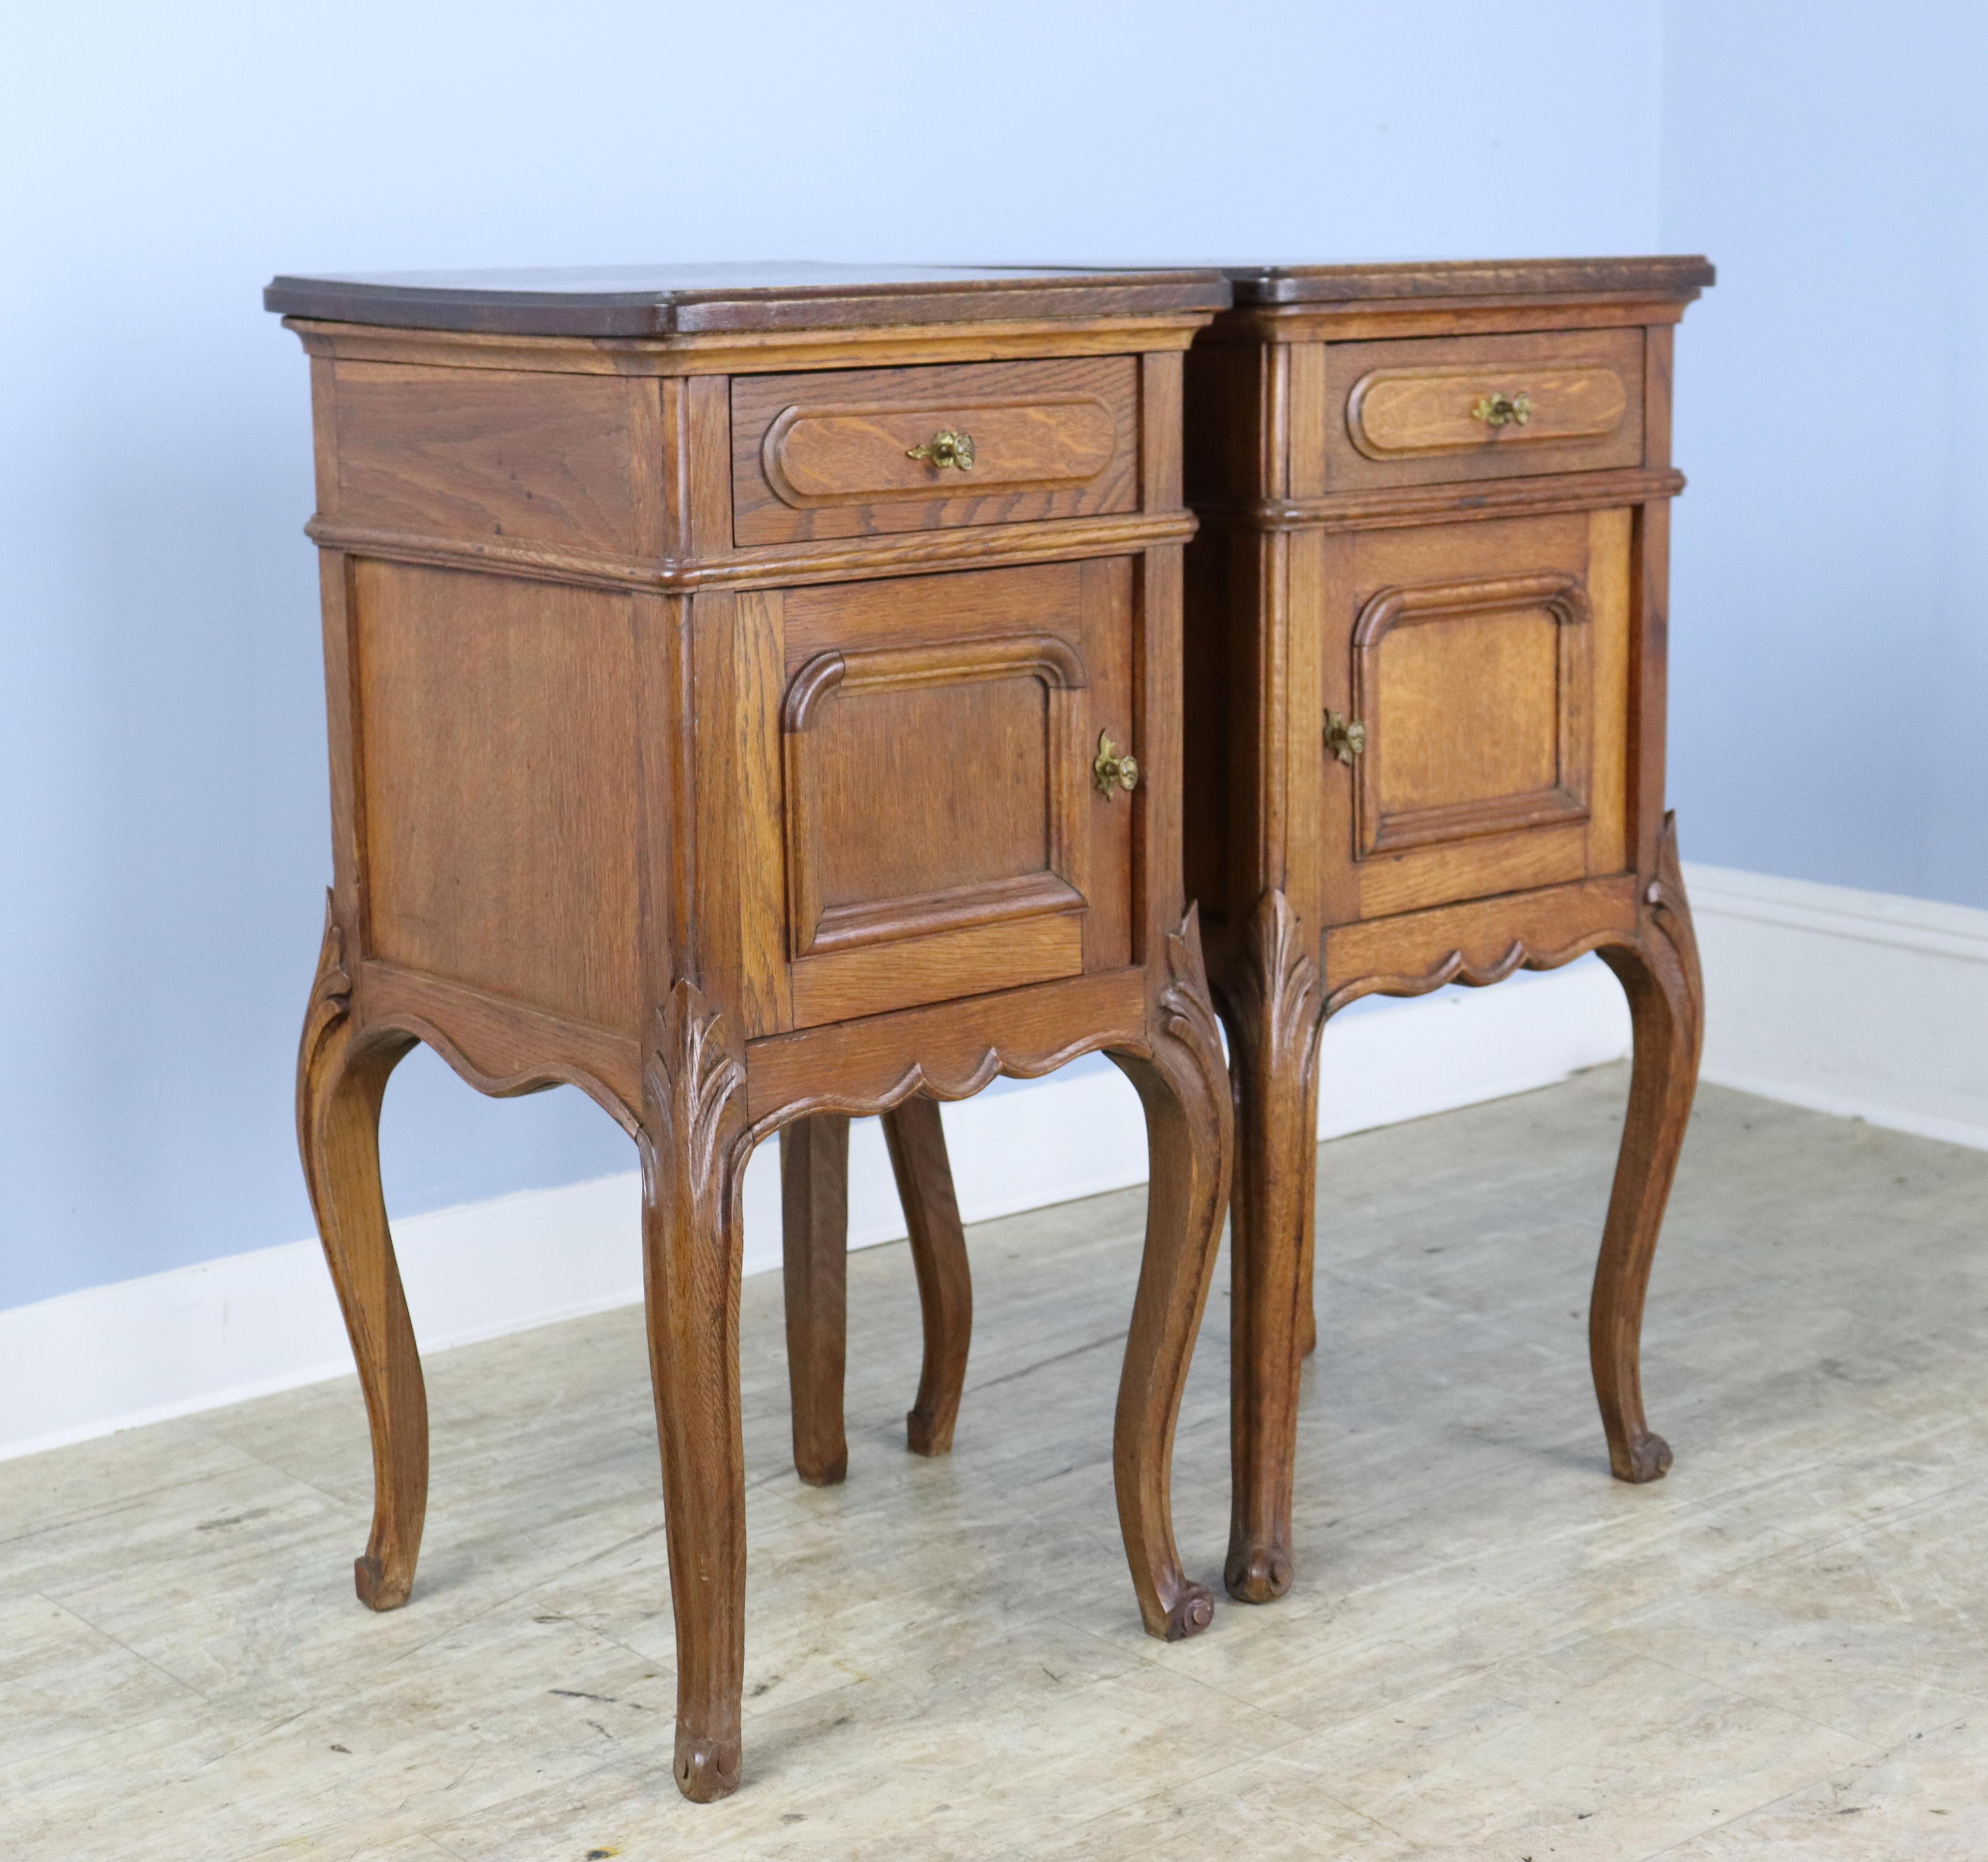 A pair of Fine charming oak nightstands with a sweet little cupboard and gracefully curved cabriole legs. The tops are in very good condition, and the legs are nicely carved. Wonderful vibrant color and good oak grain.